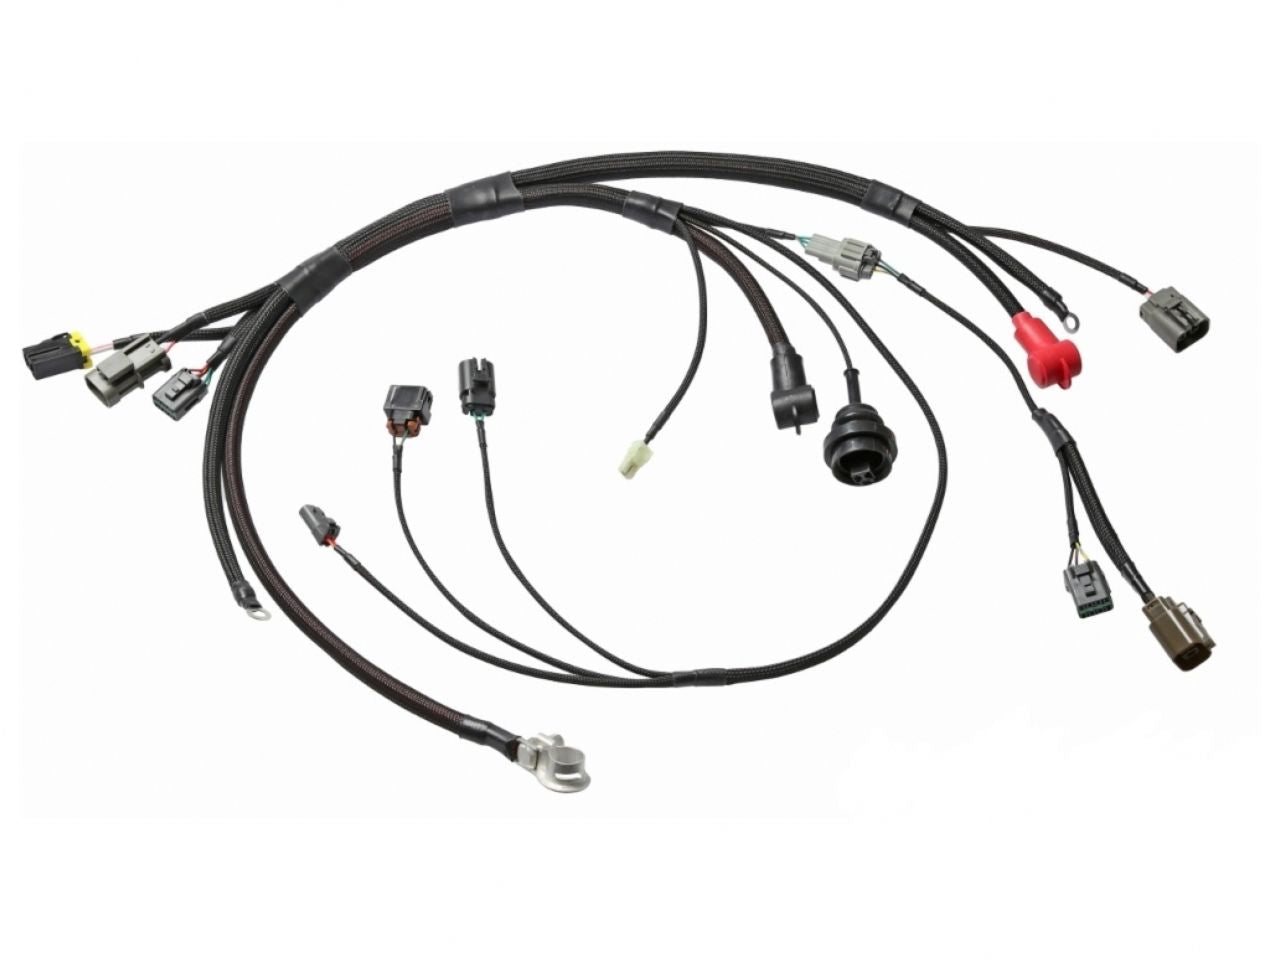 Wiring Specialties RB25DET Wiring Harness COMBO for S13 240sx - OEM SERIES